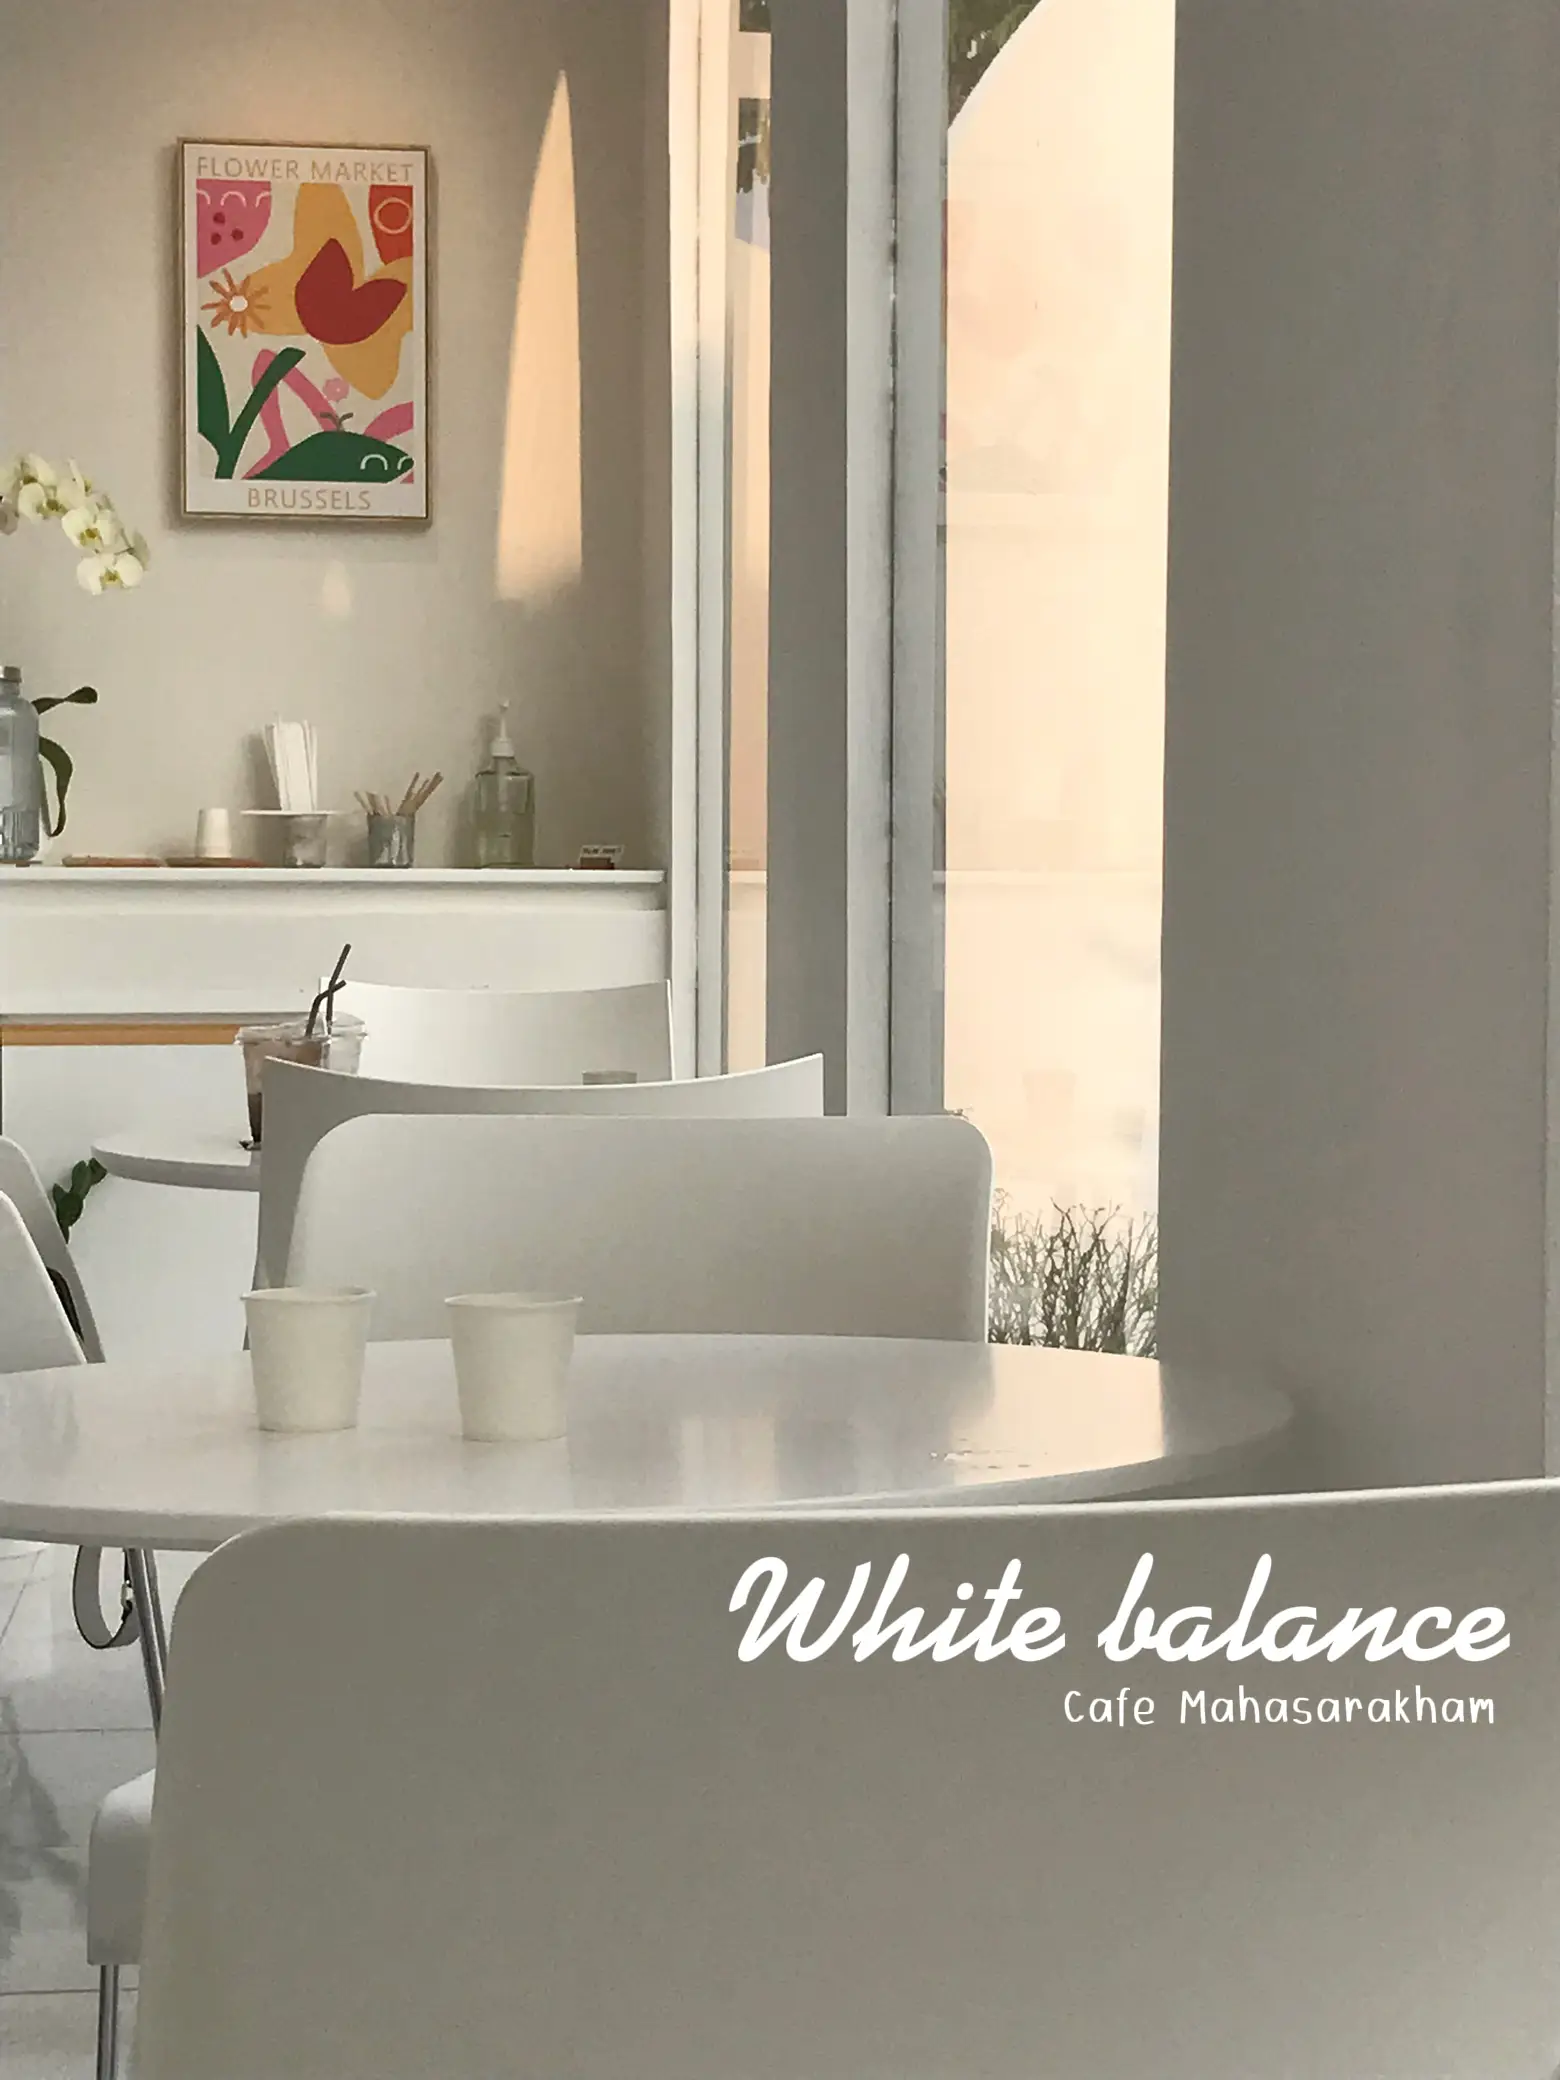 White Balance cafe, minimalist cafe ♡🐰, Gallery posted by Pepie 🍅💥